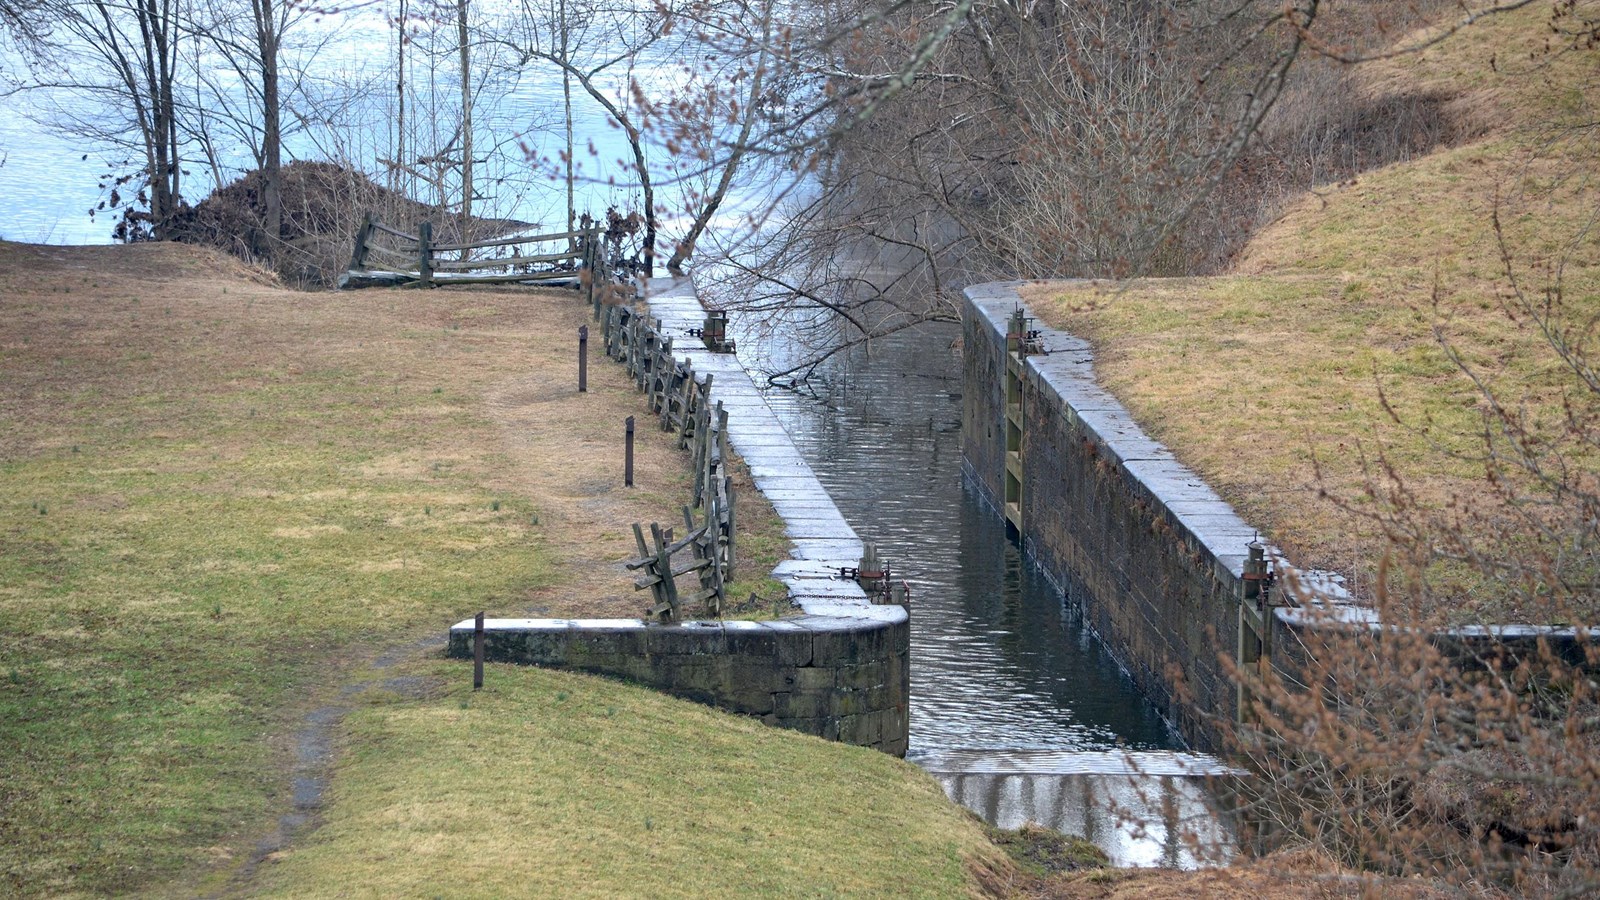 A narrow canal, bounded by stone walls, flows through a grassy field and into a river.